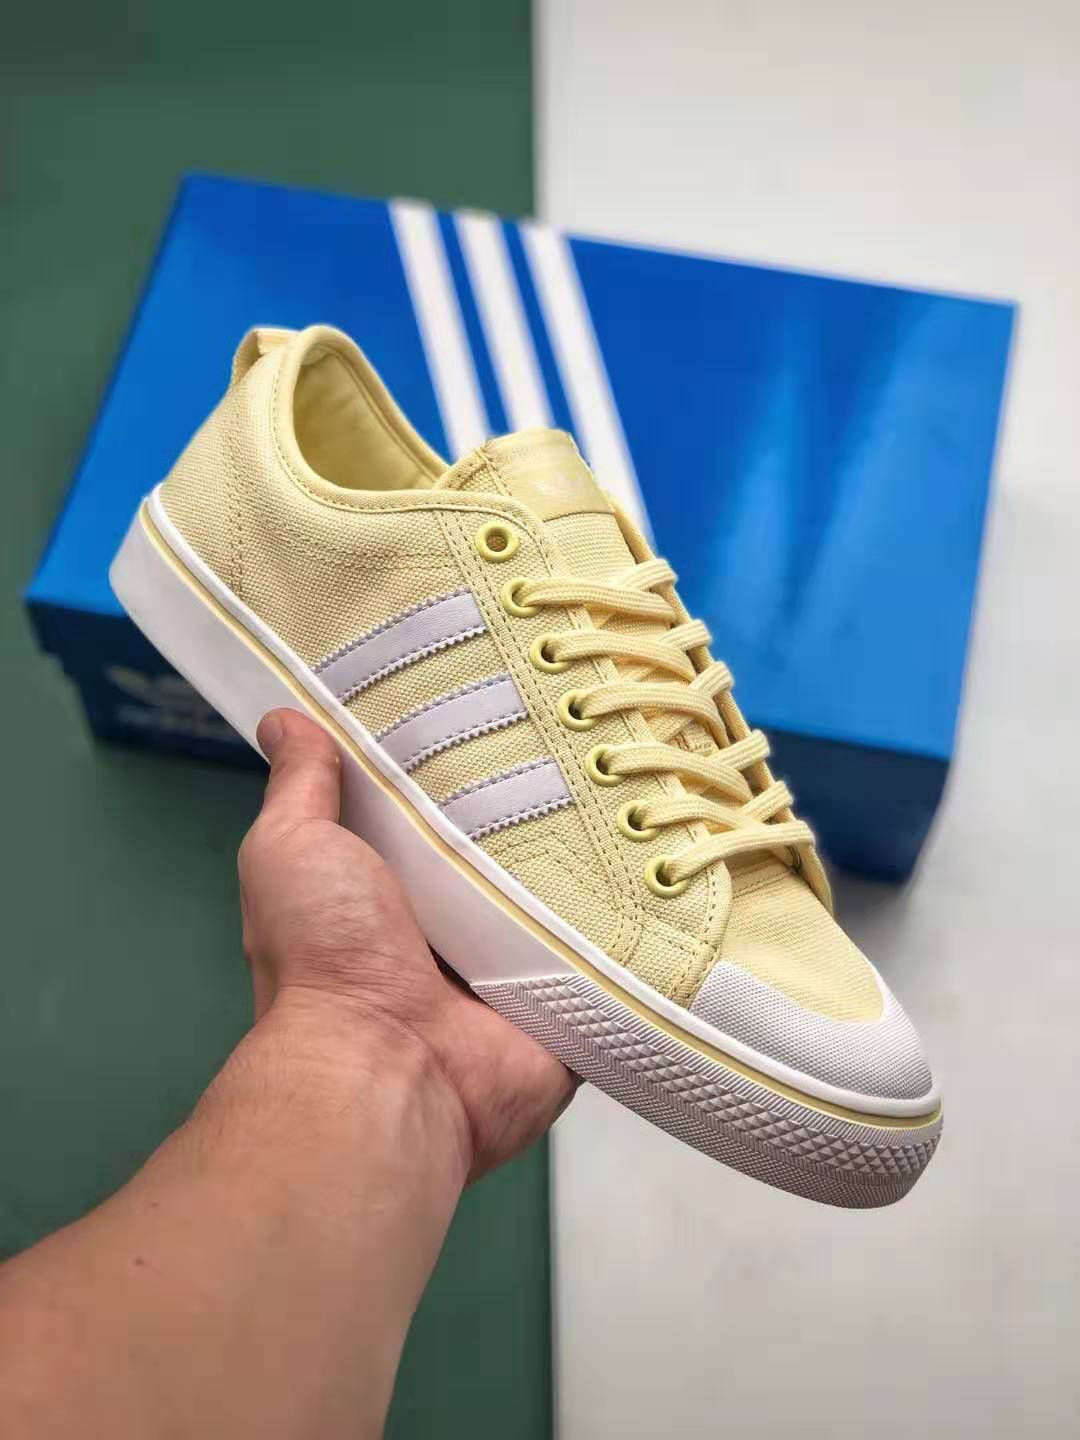 Adidas Womens Original Nizza Soft Vision Cloud White Crystal White DB3269 - Stylish and Comfortable Sneakers | Shop Now!